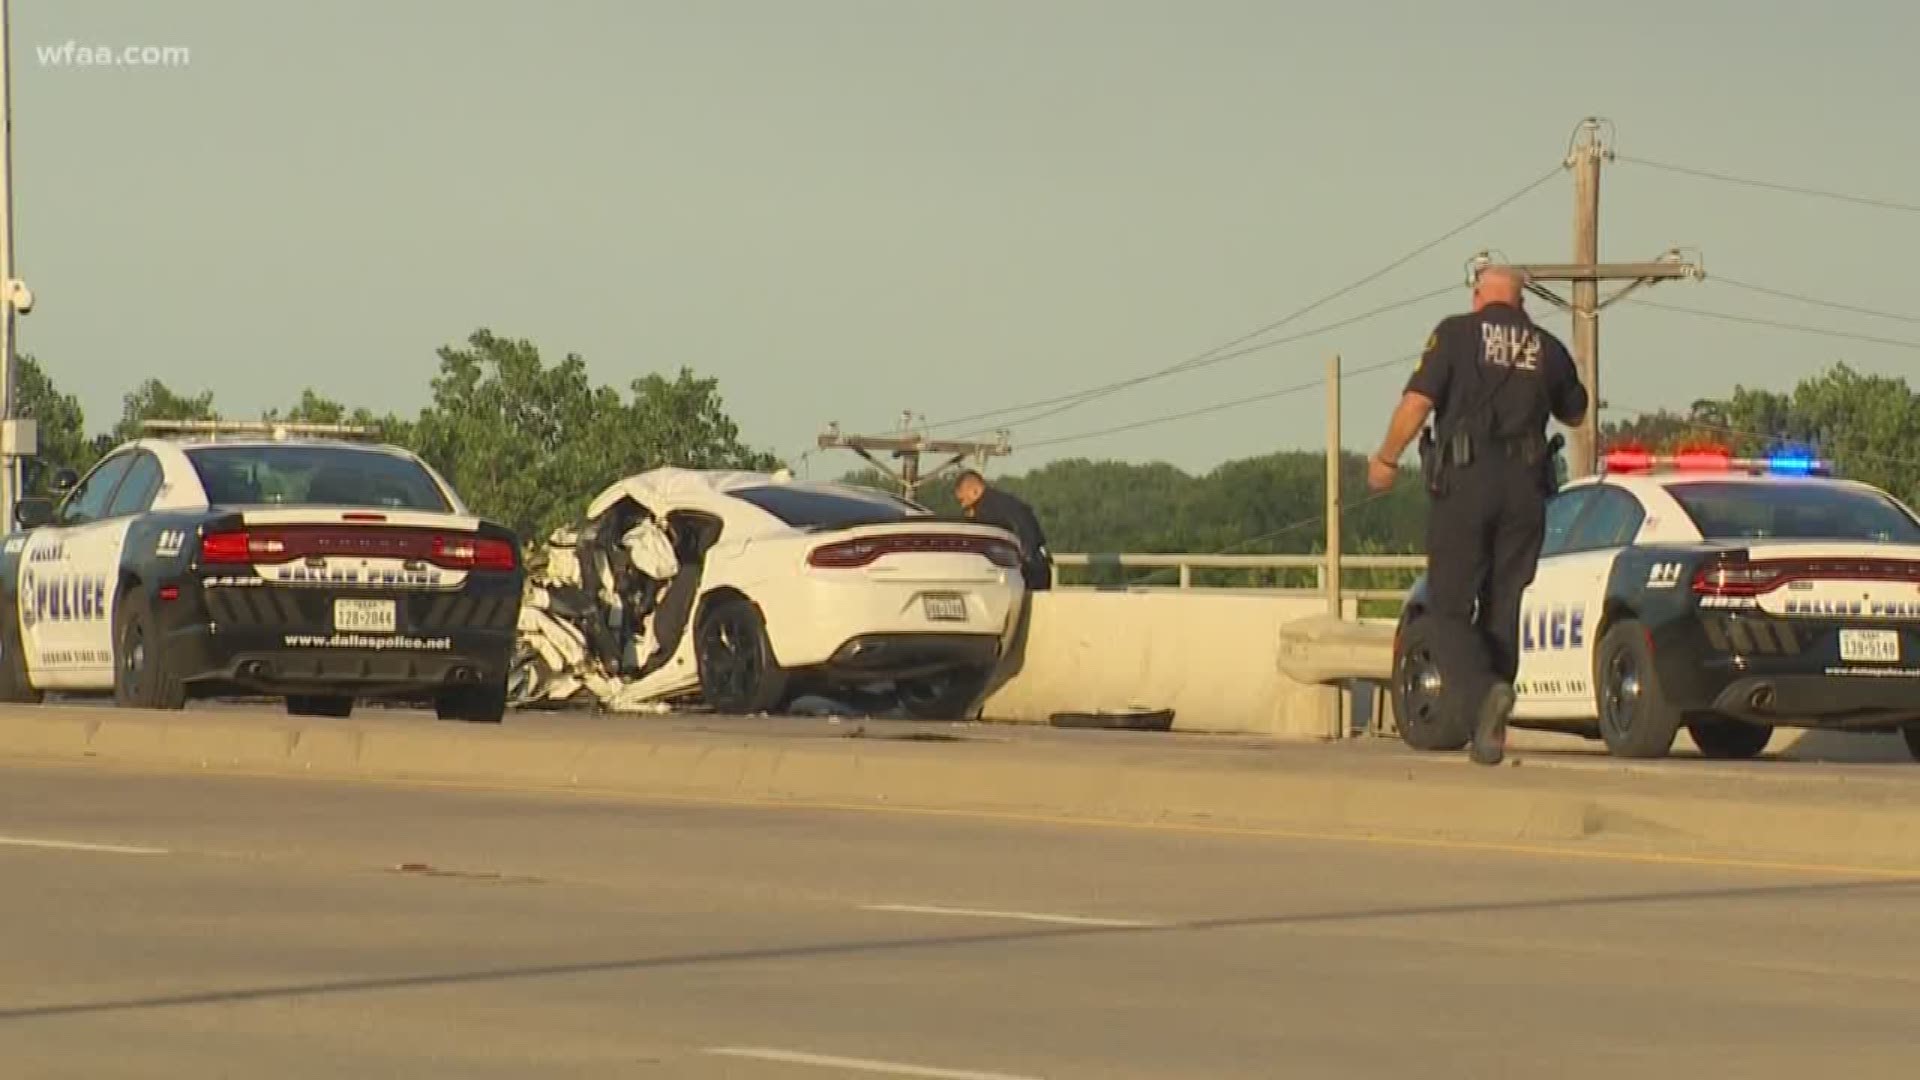 Sources: Two dead in street racing crash